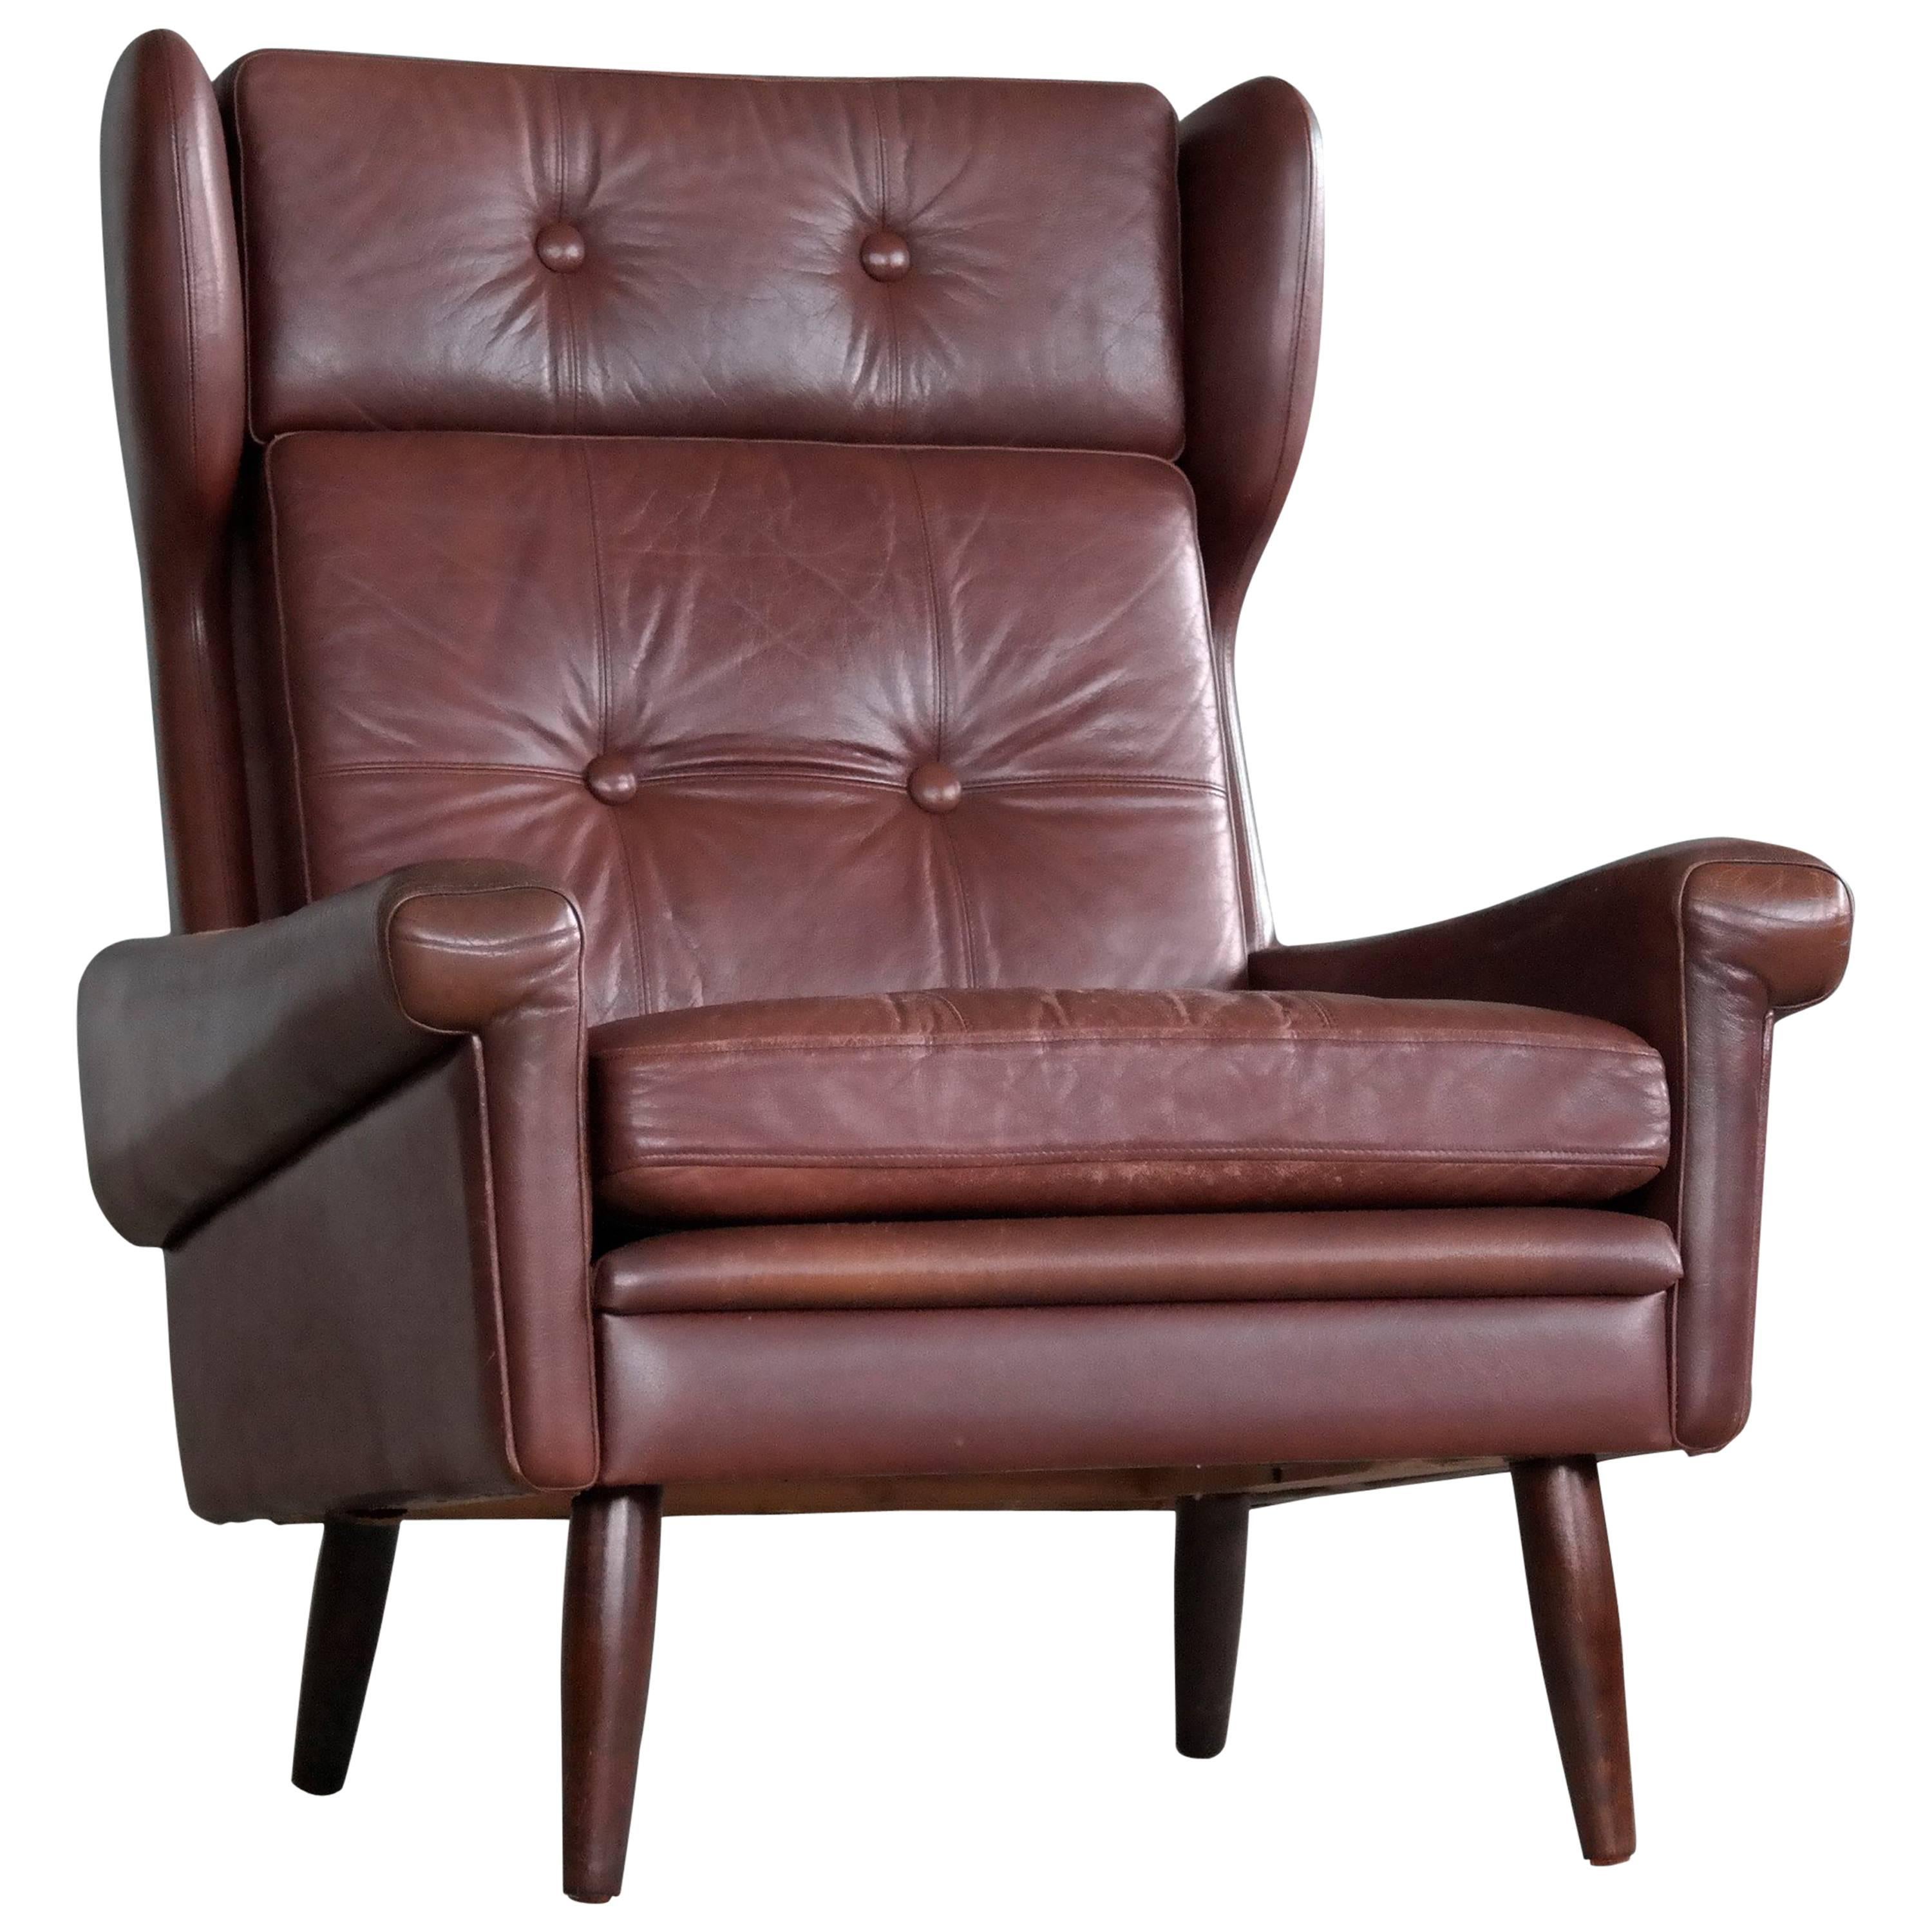 Sven Skipper High Back Winged Arm or Lounge Chair in Cordovan Leather